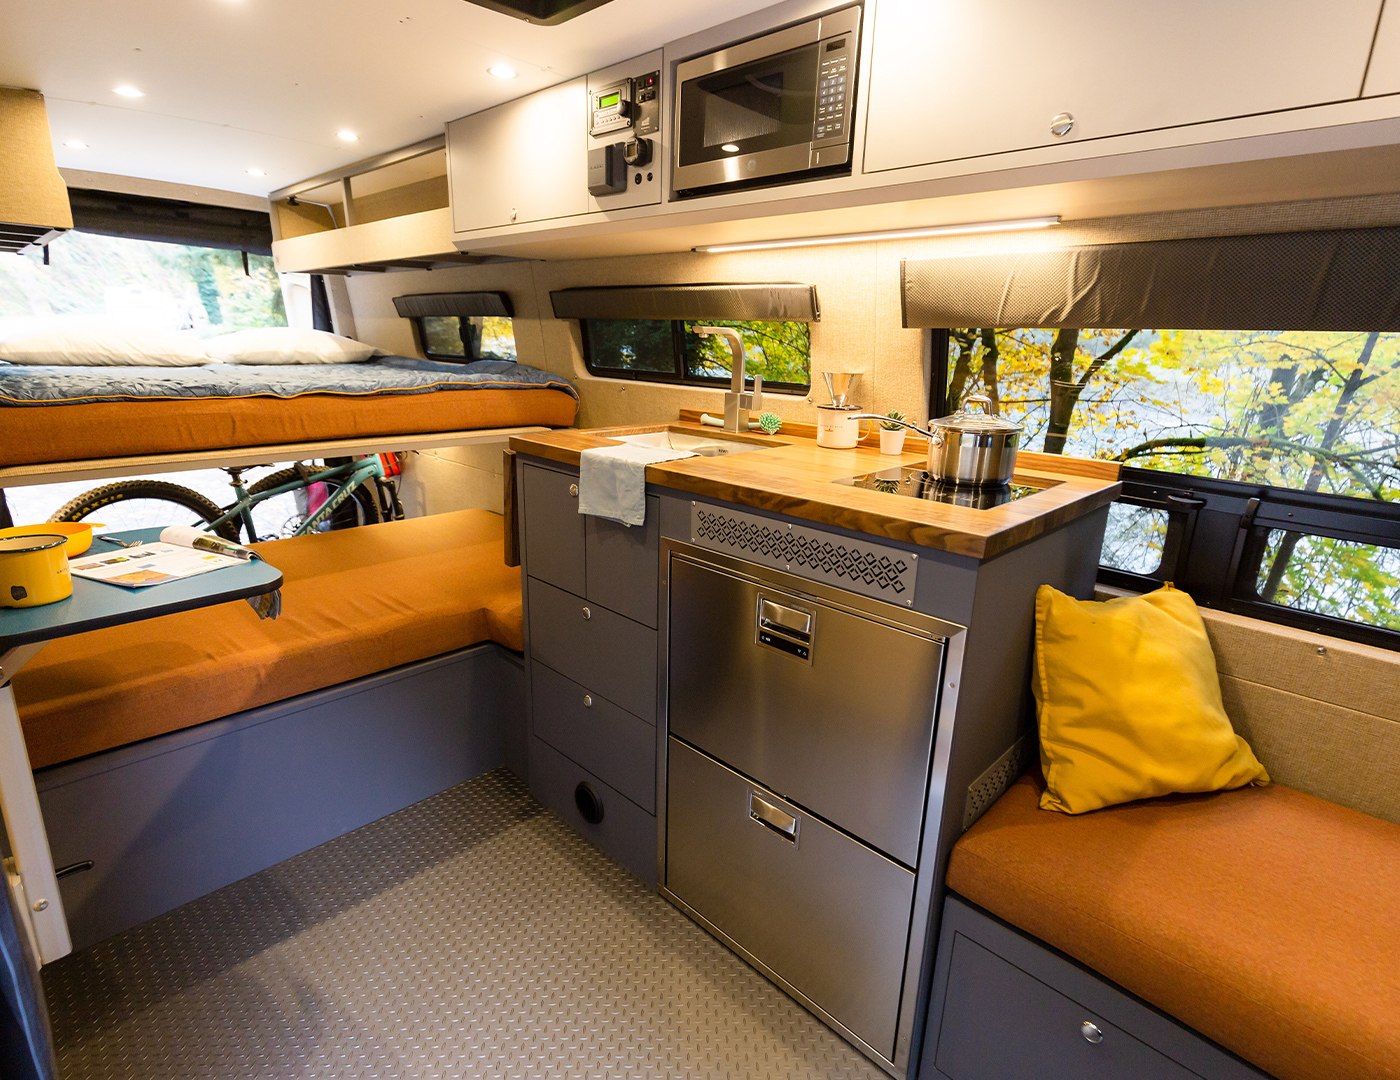 woodside is an Outside van 170 ext custom conversion. great for mountain biking and camping. seating for 3 and sleeping for 2